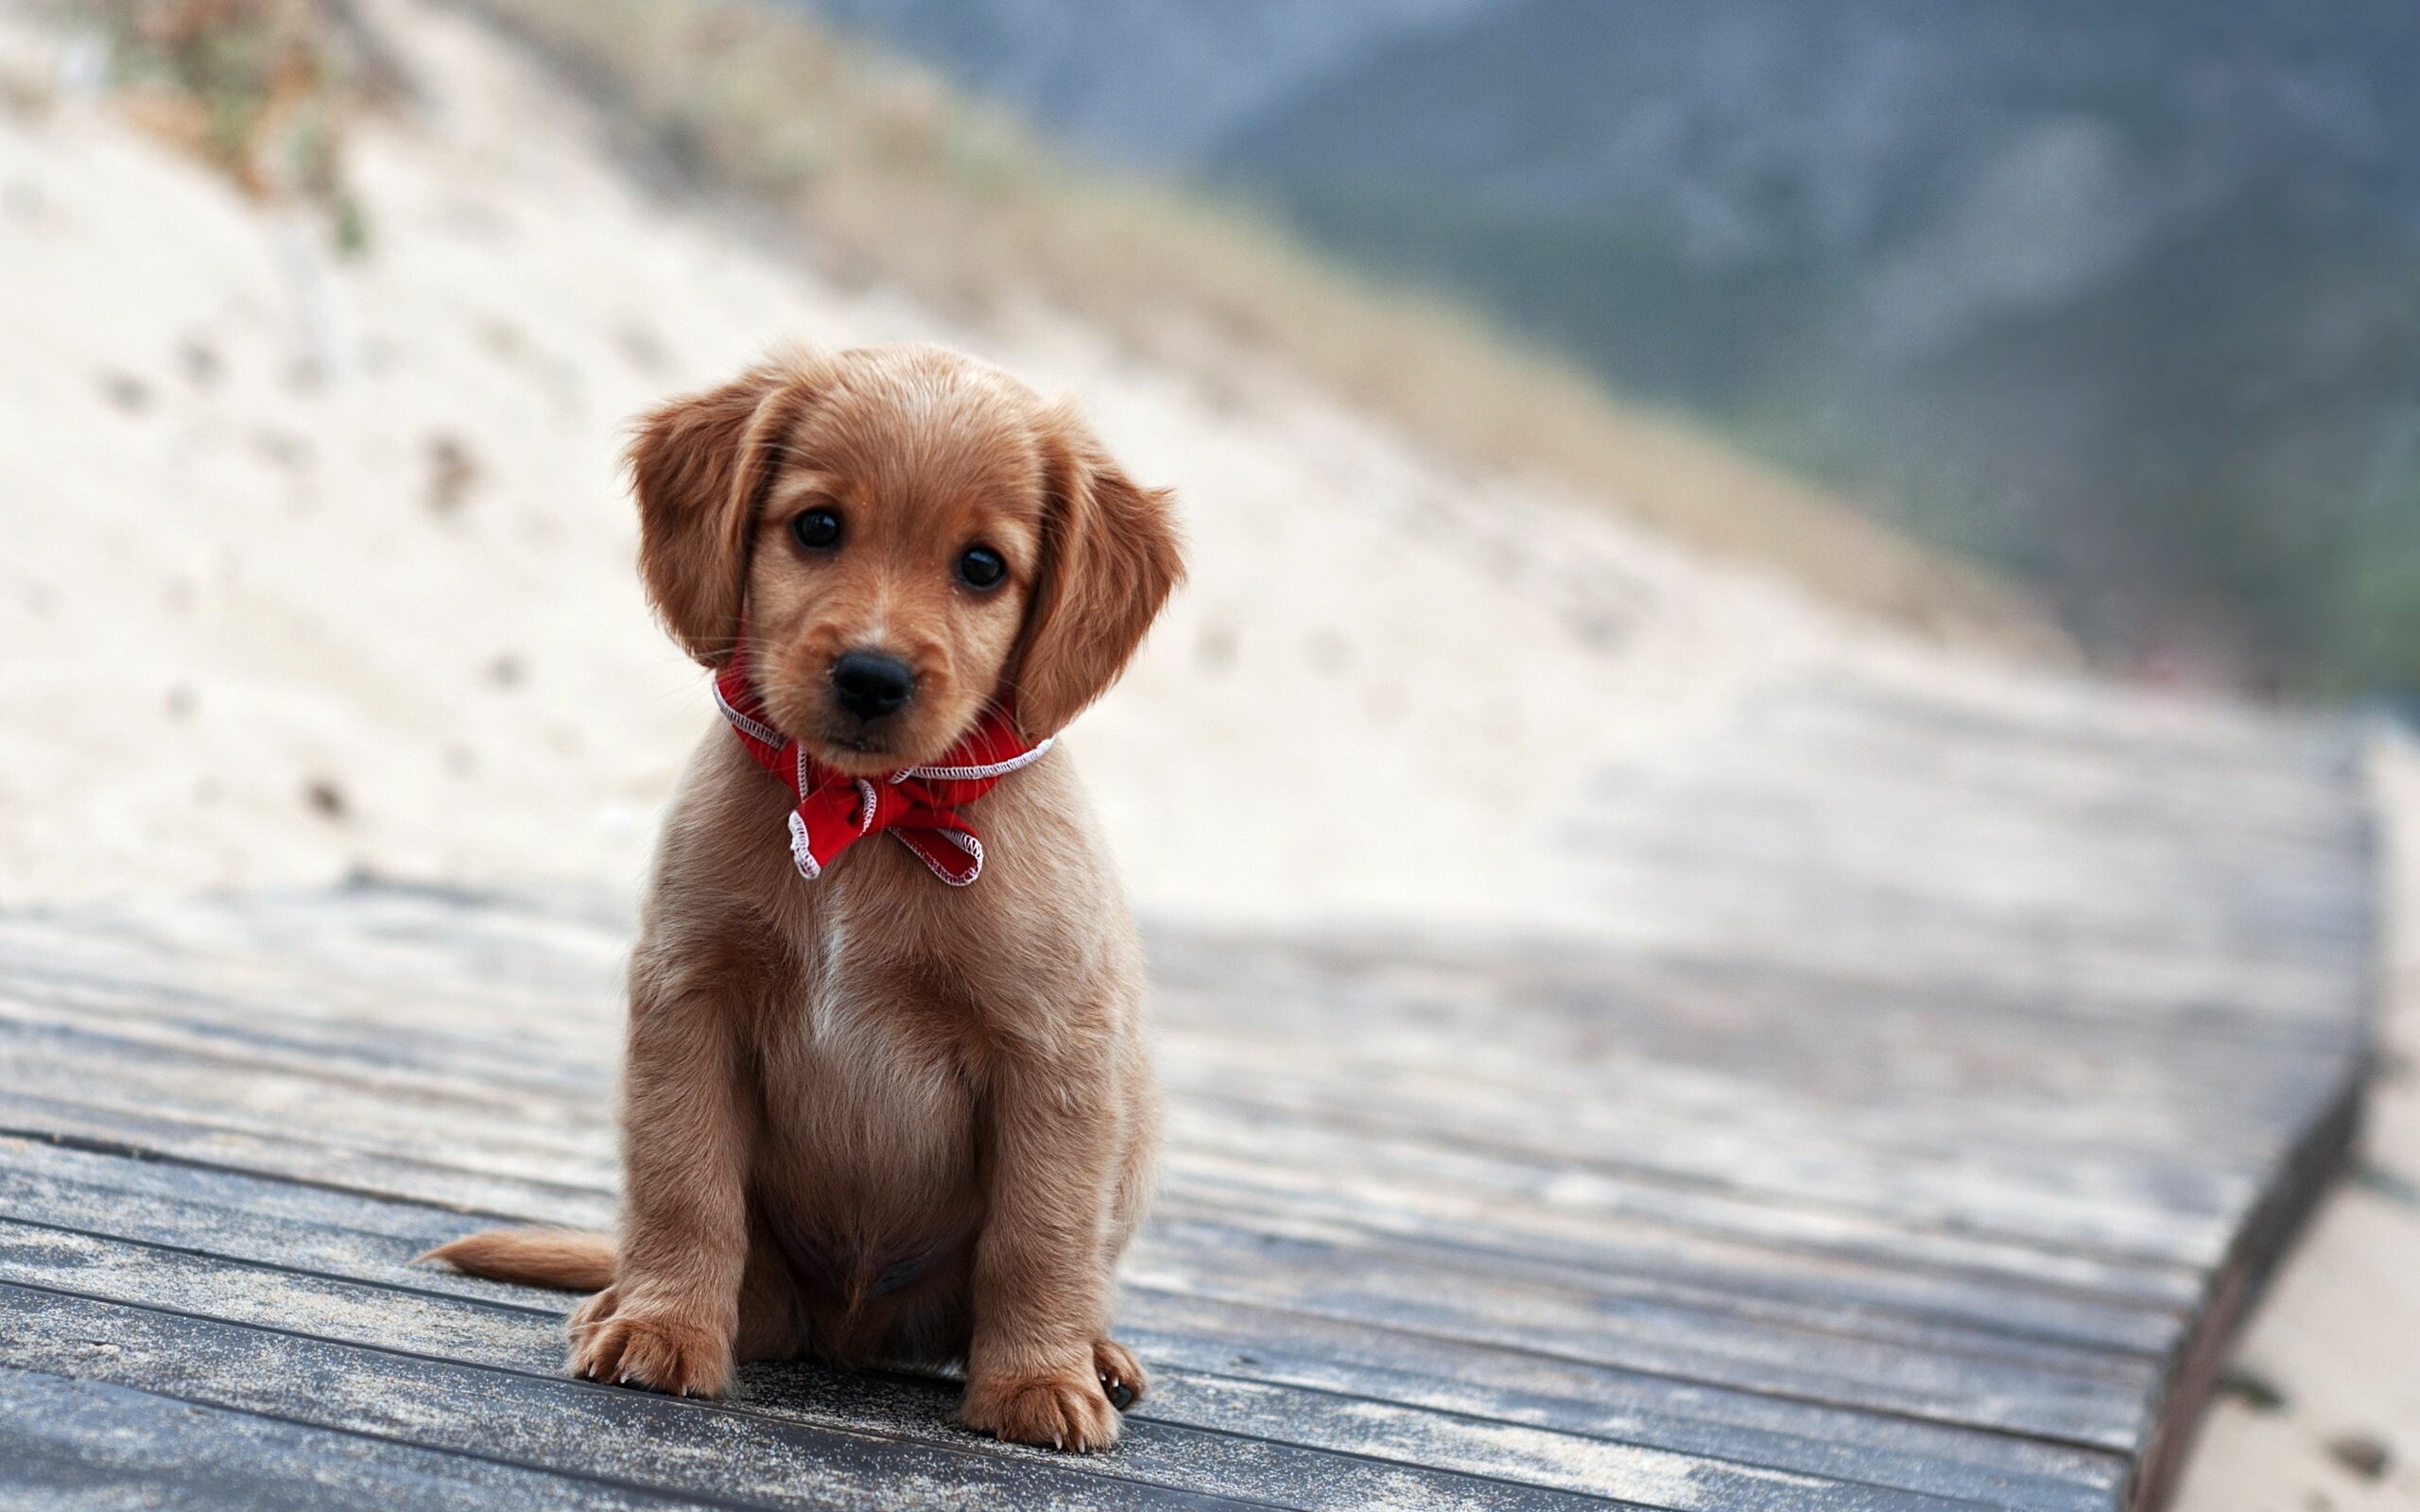 Puppy: Dog pups, Born with a fully functional sense of smell. 2560x1600 HD Wallpaper.